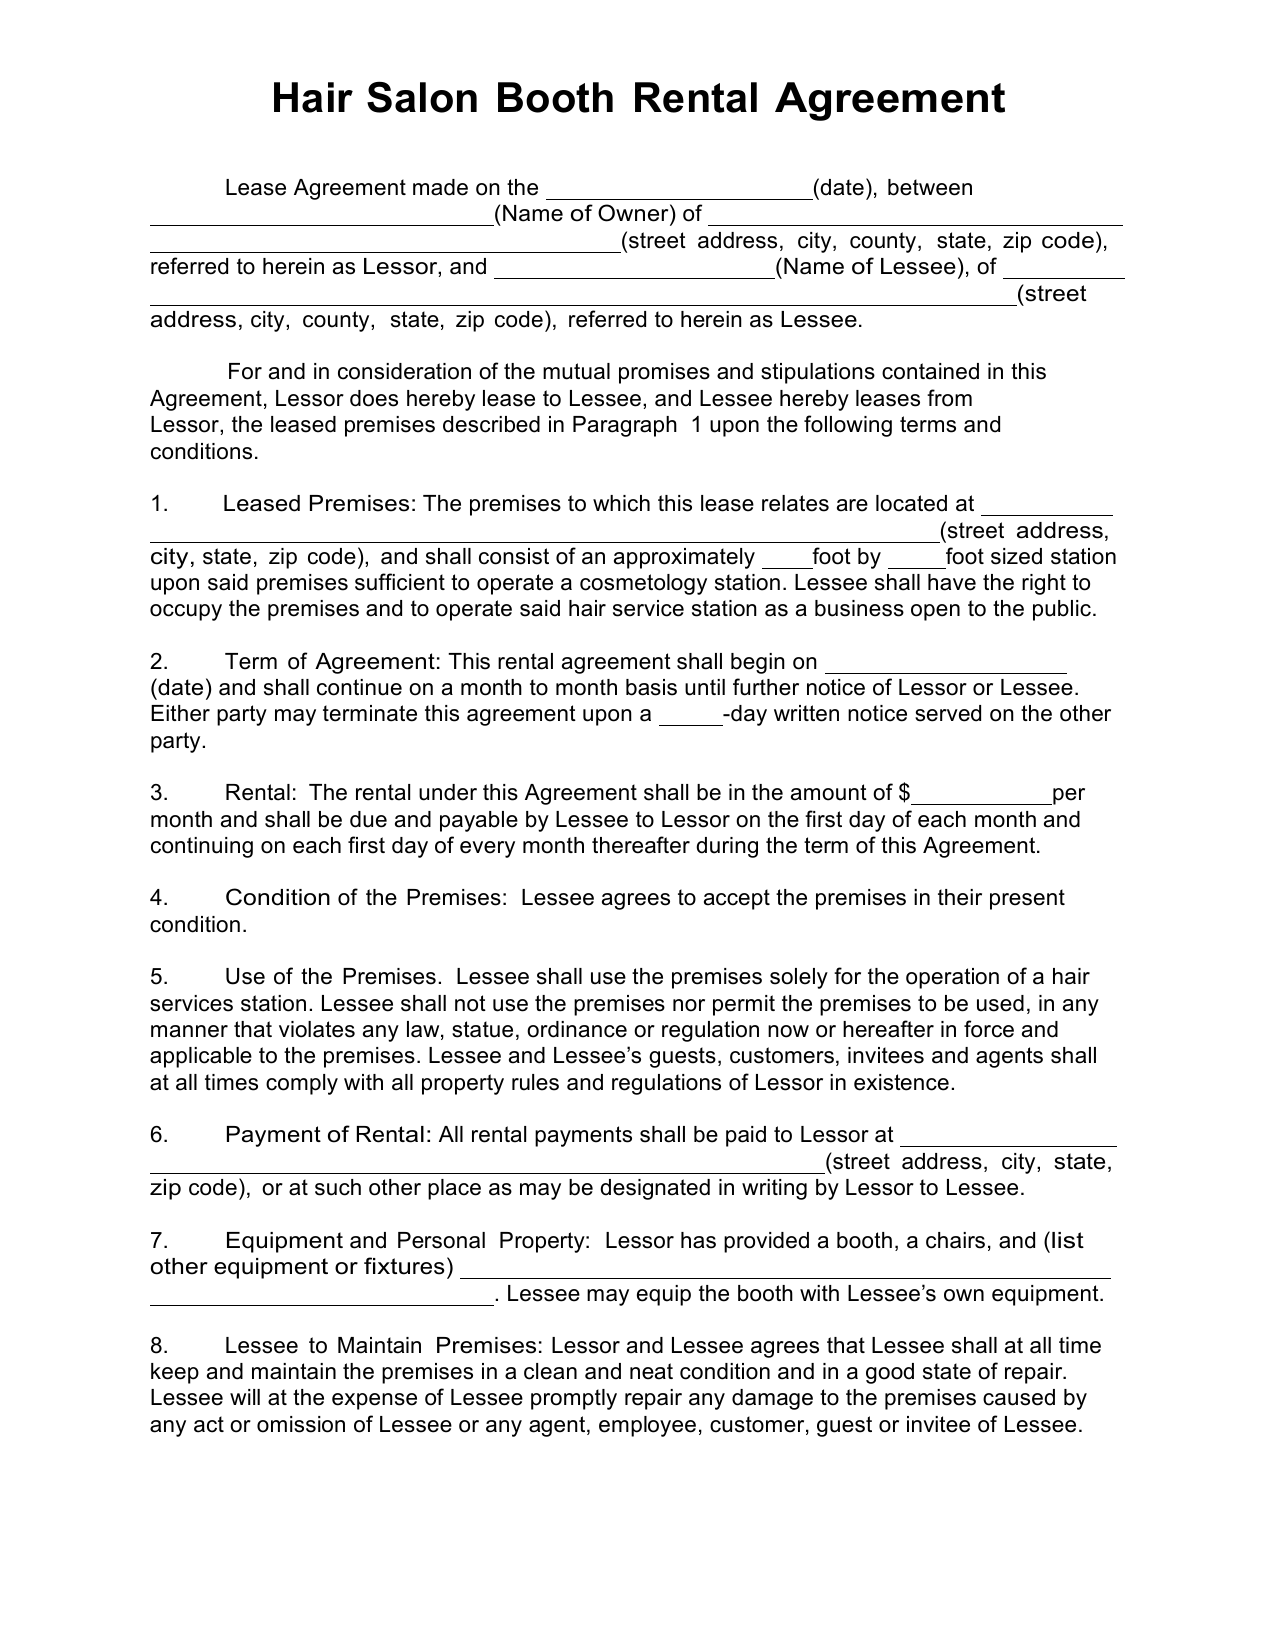 Download Salon Booth Rental Lease Agreement Template | PDF | RTF 